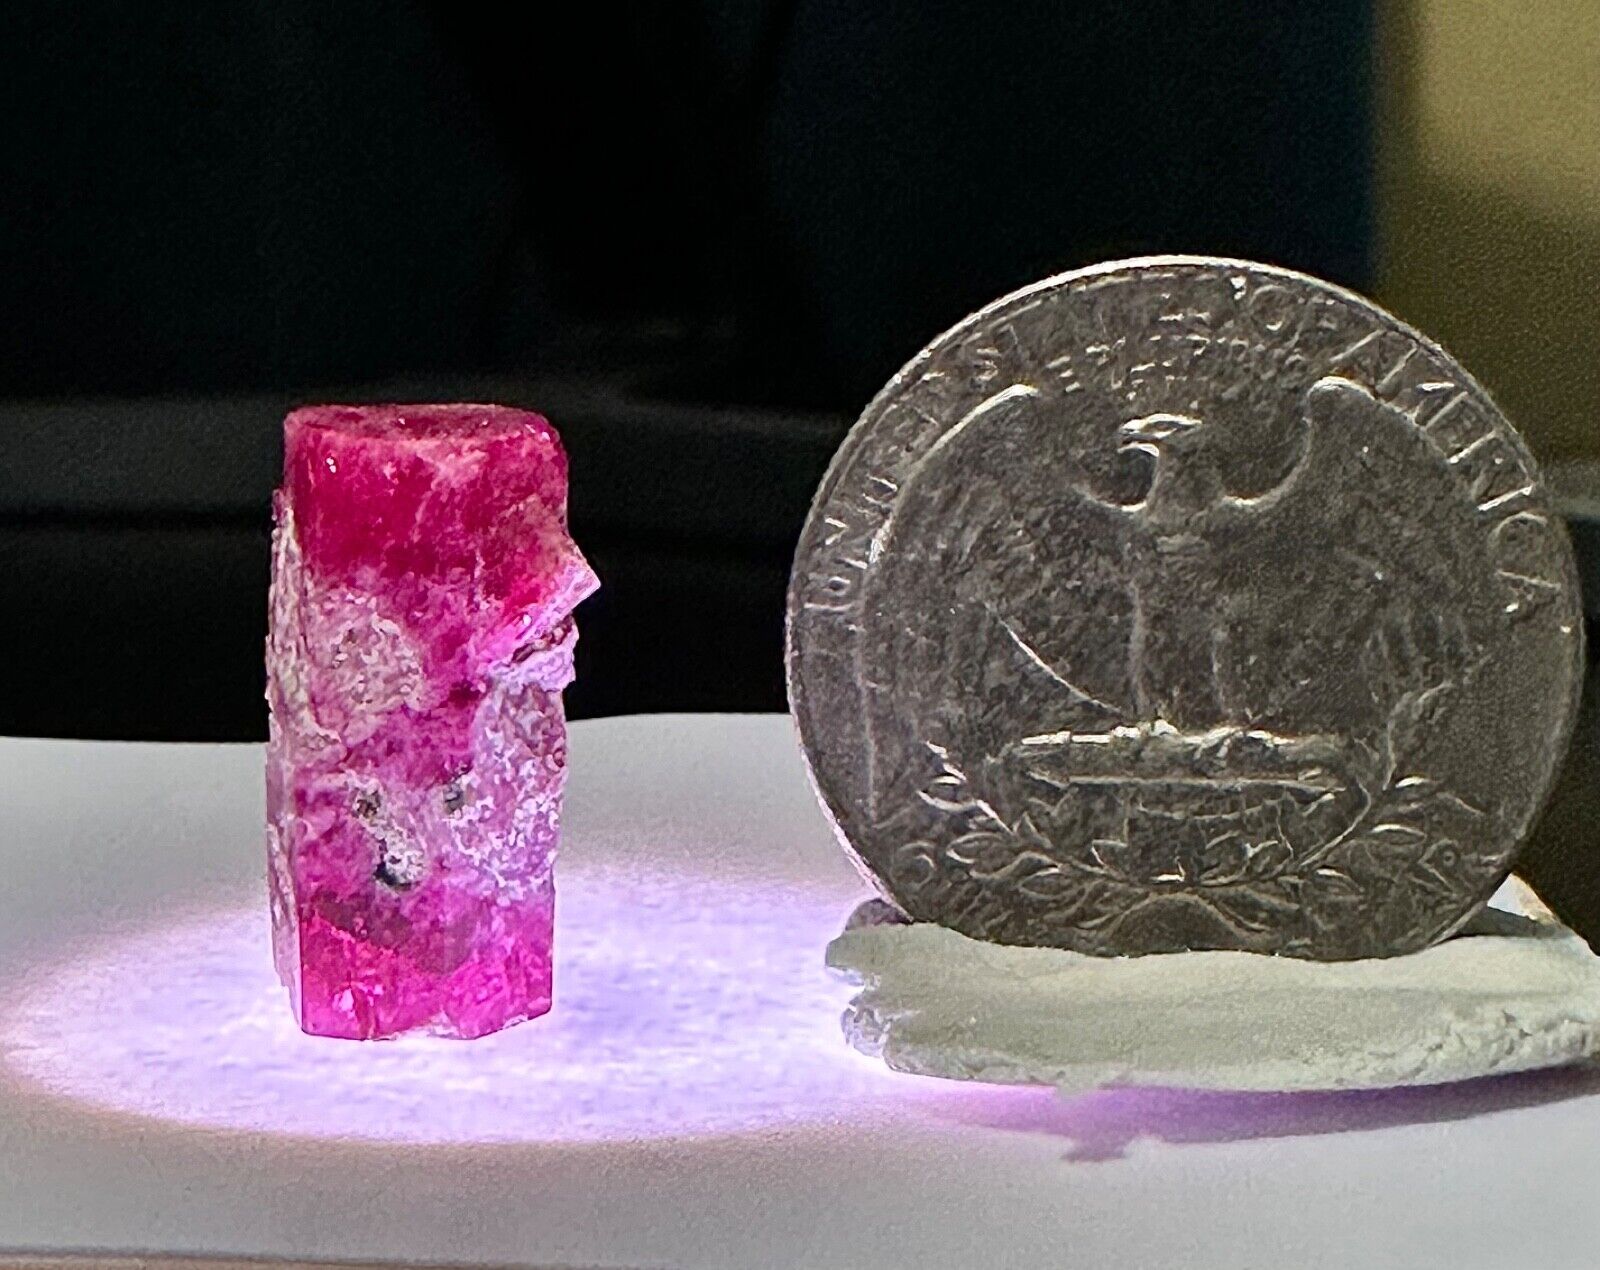 Extremely Rare and Large Bixbite (Red Beryl) Specimen from Utah, USA - 14.60 Ct